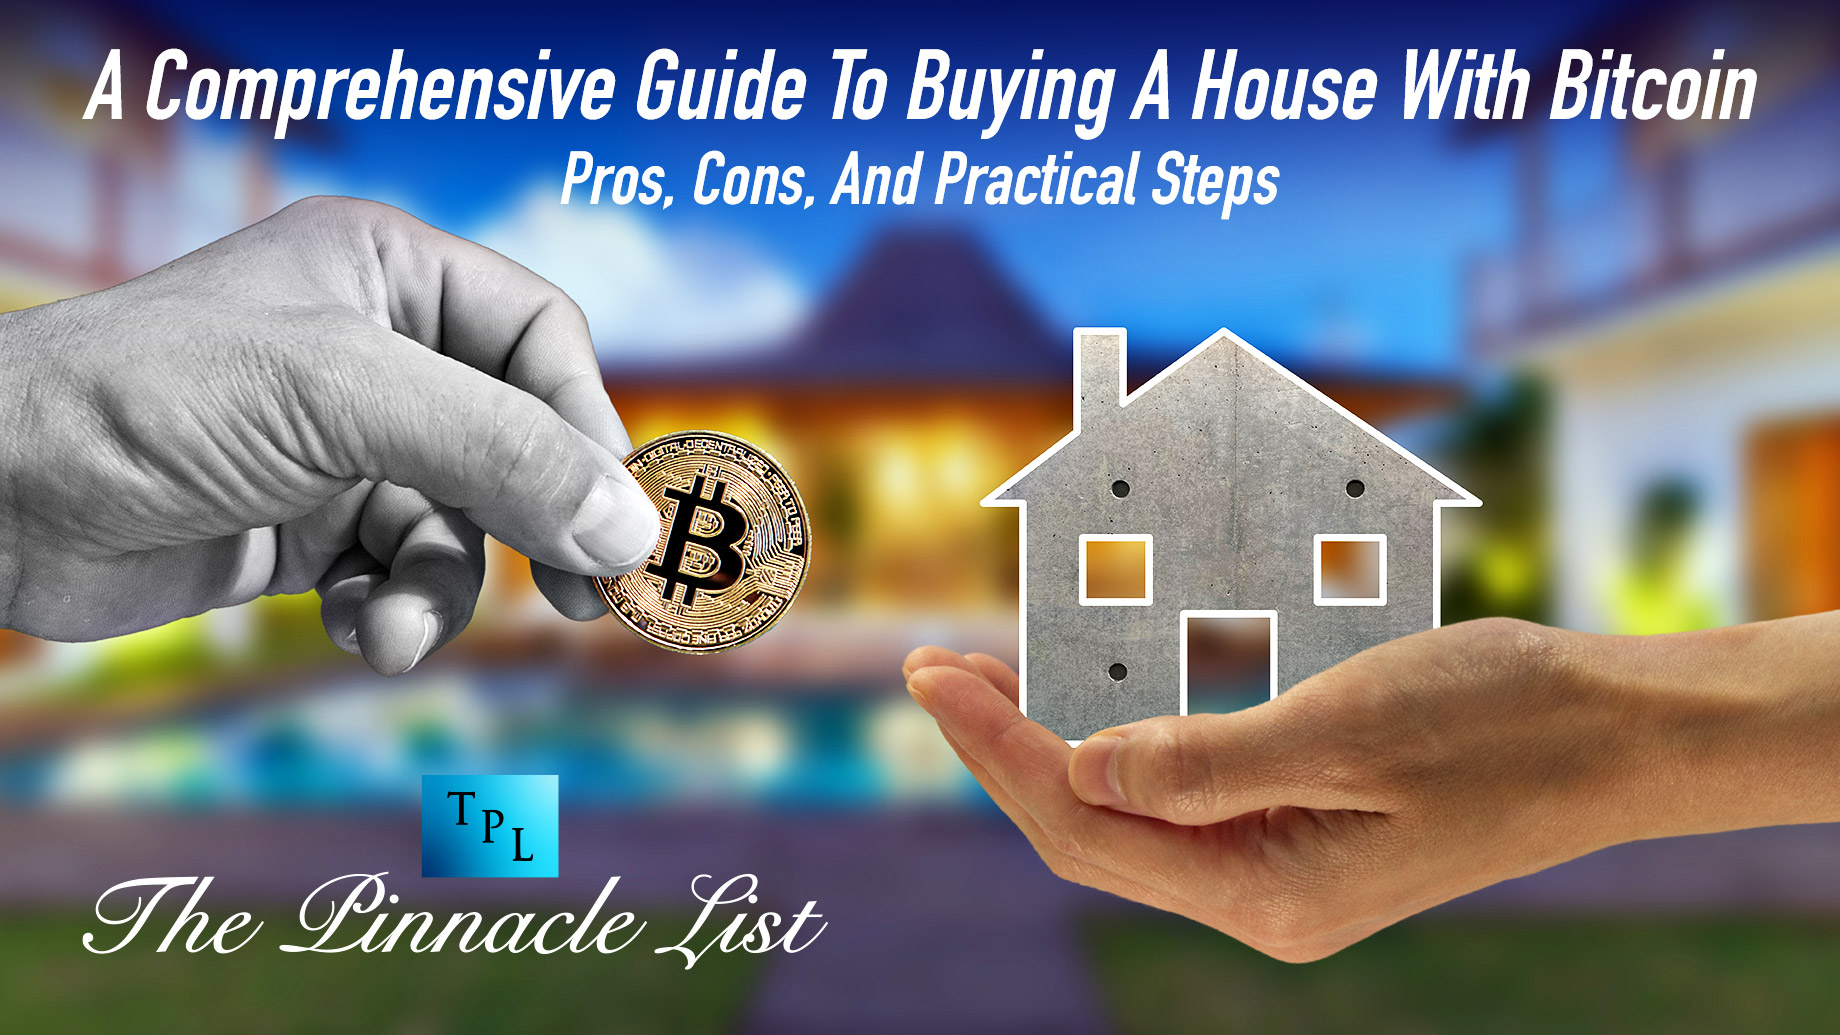 A Comprehensive Guide To Buying A House With Bitcoin: Pros, Cons, And Practical Steps